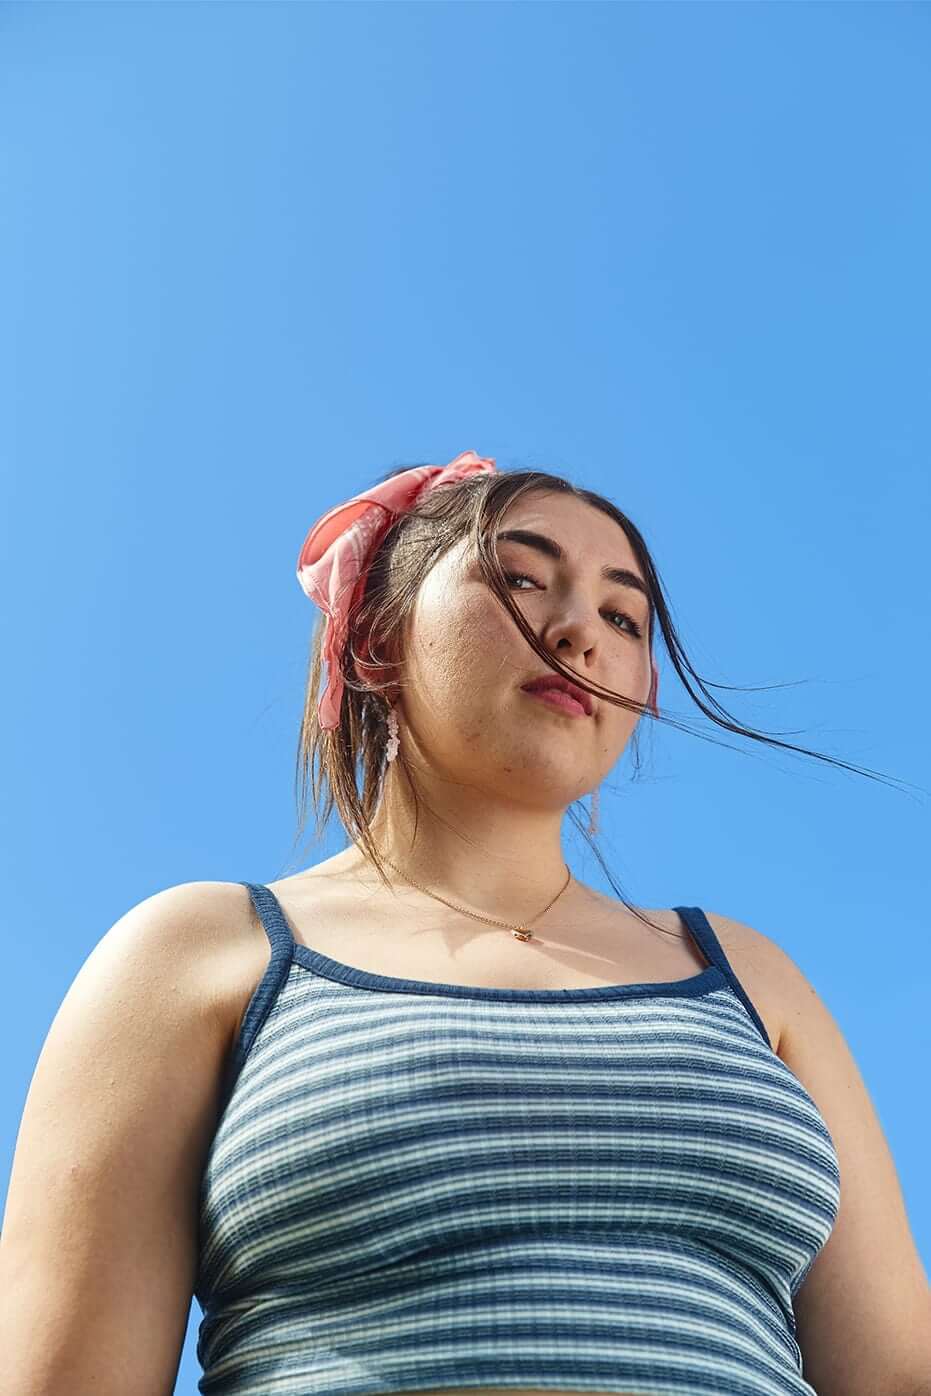 Portrait of an LGBTQ young person against a blue sky